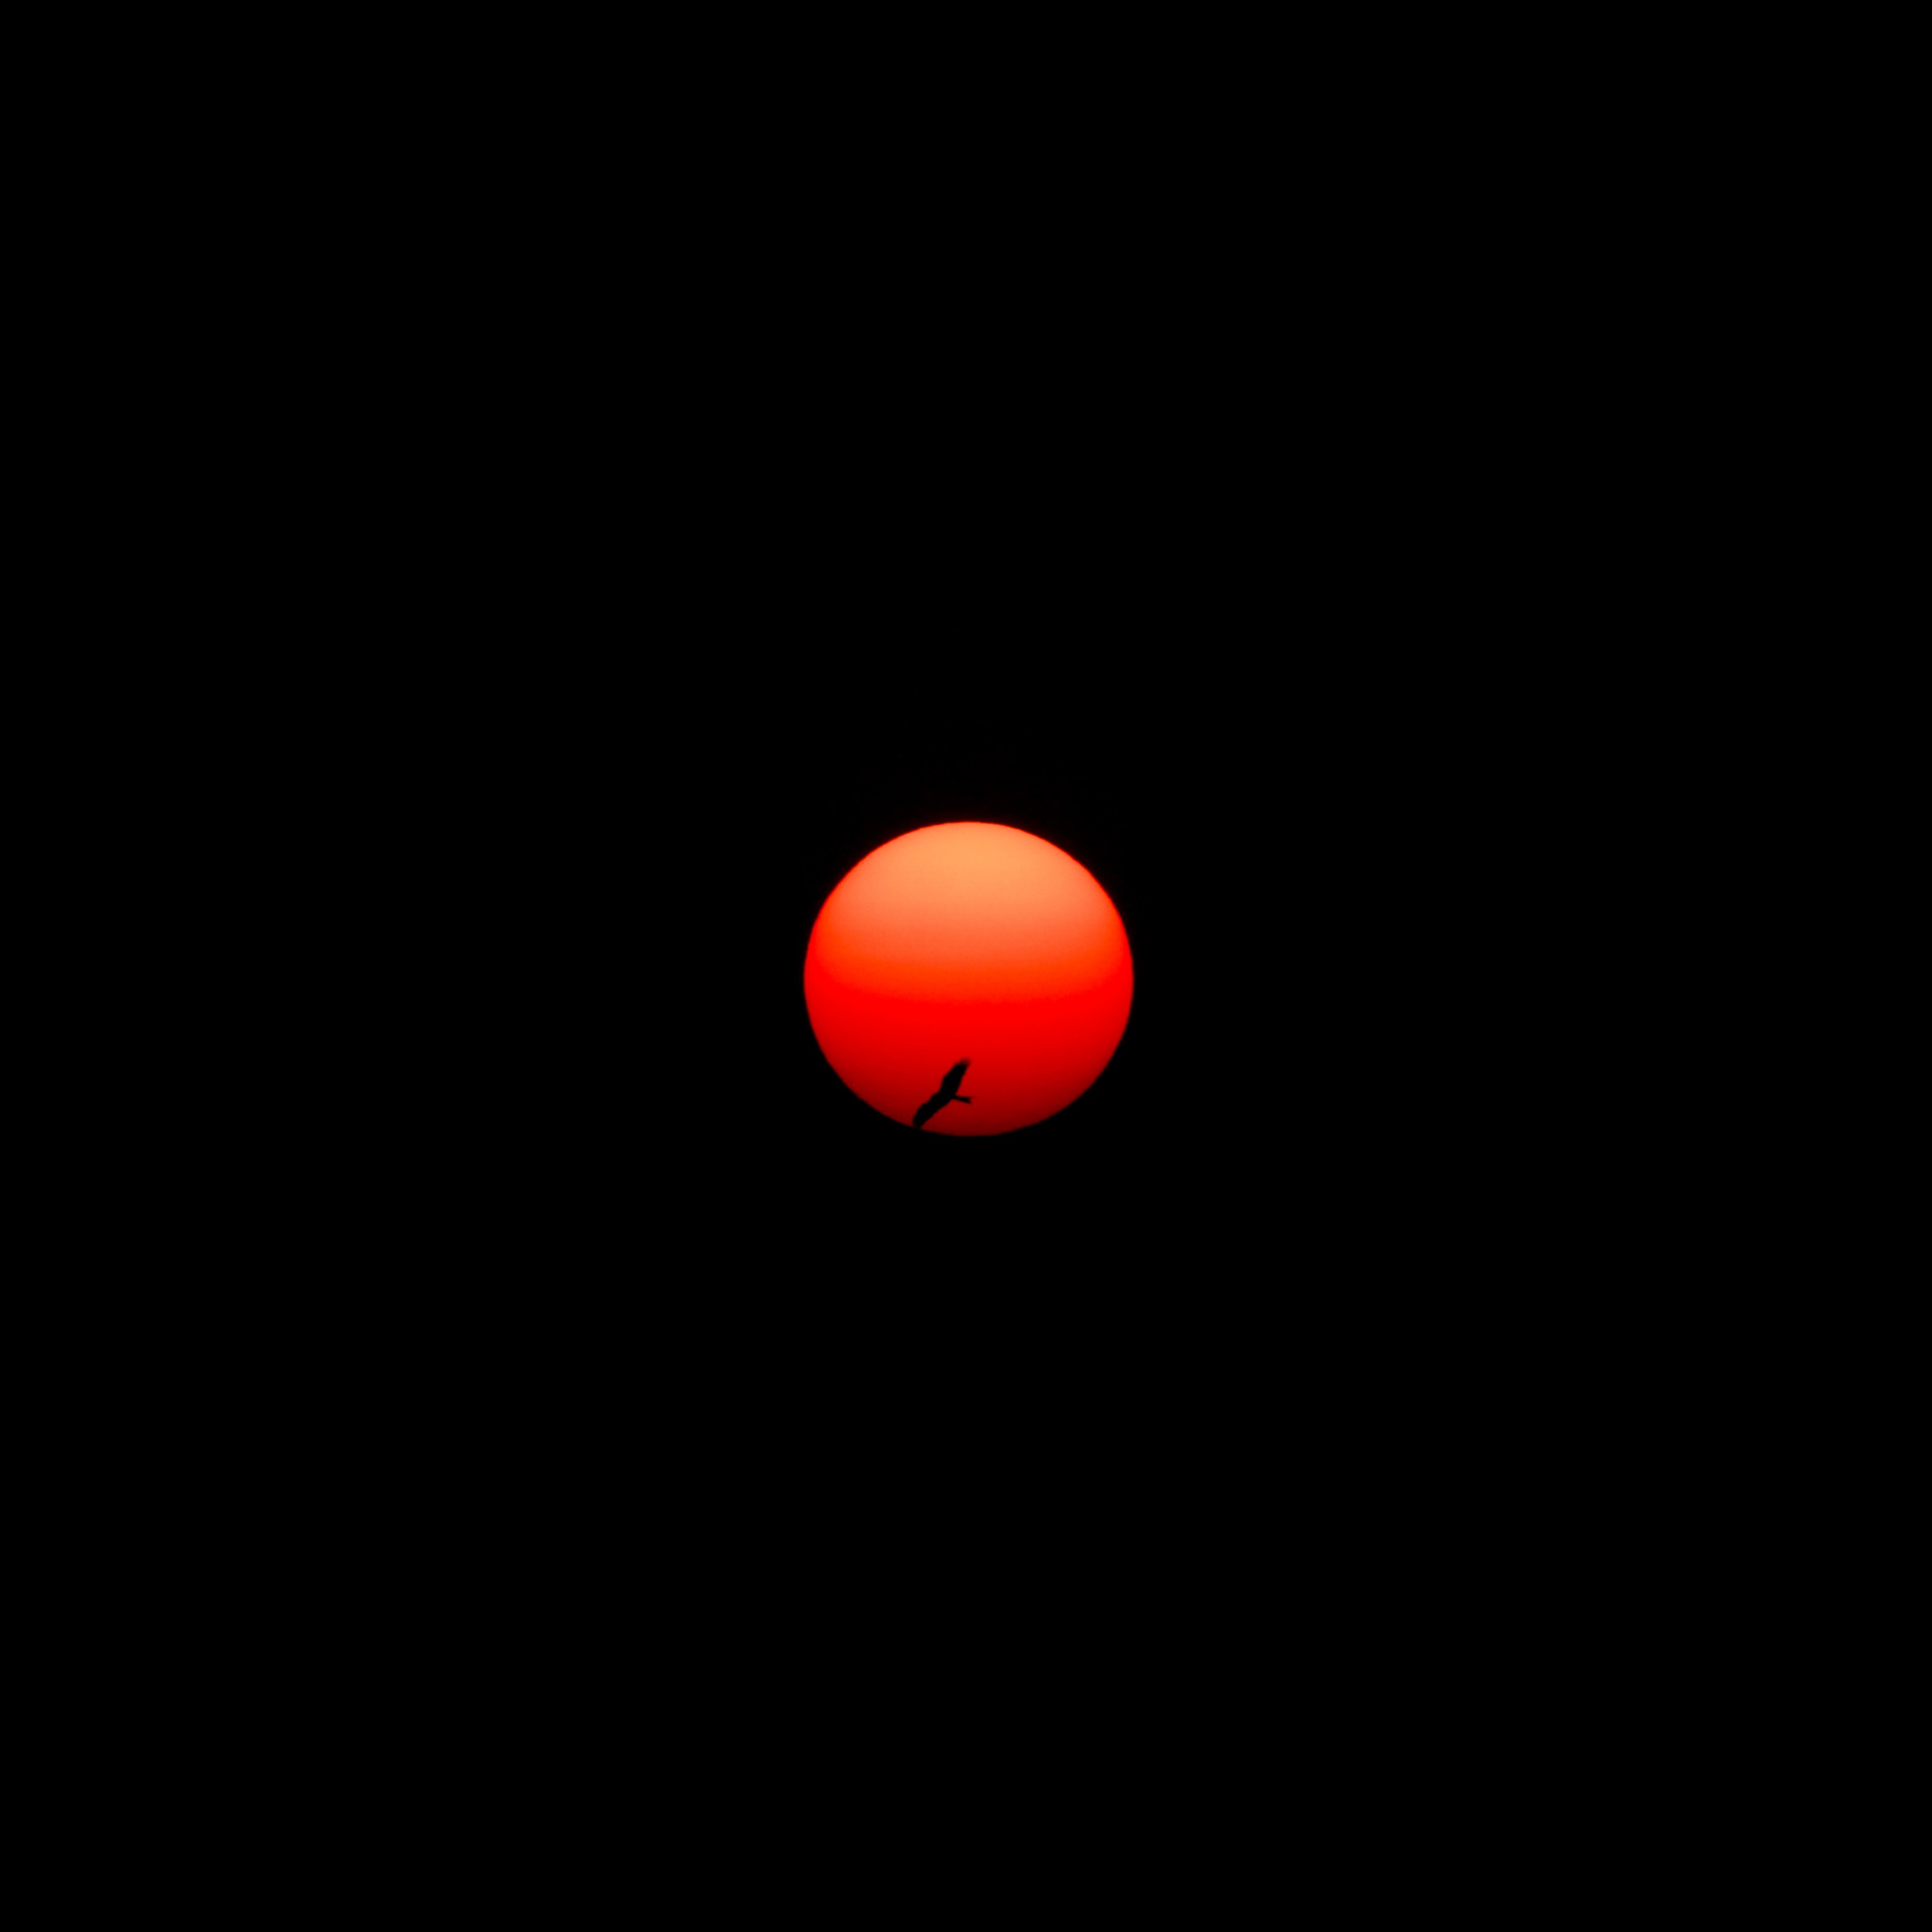 93524 download wallpaper dark, sun, red, bird, circle screensavers and pictures for free